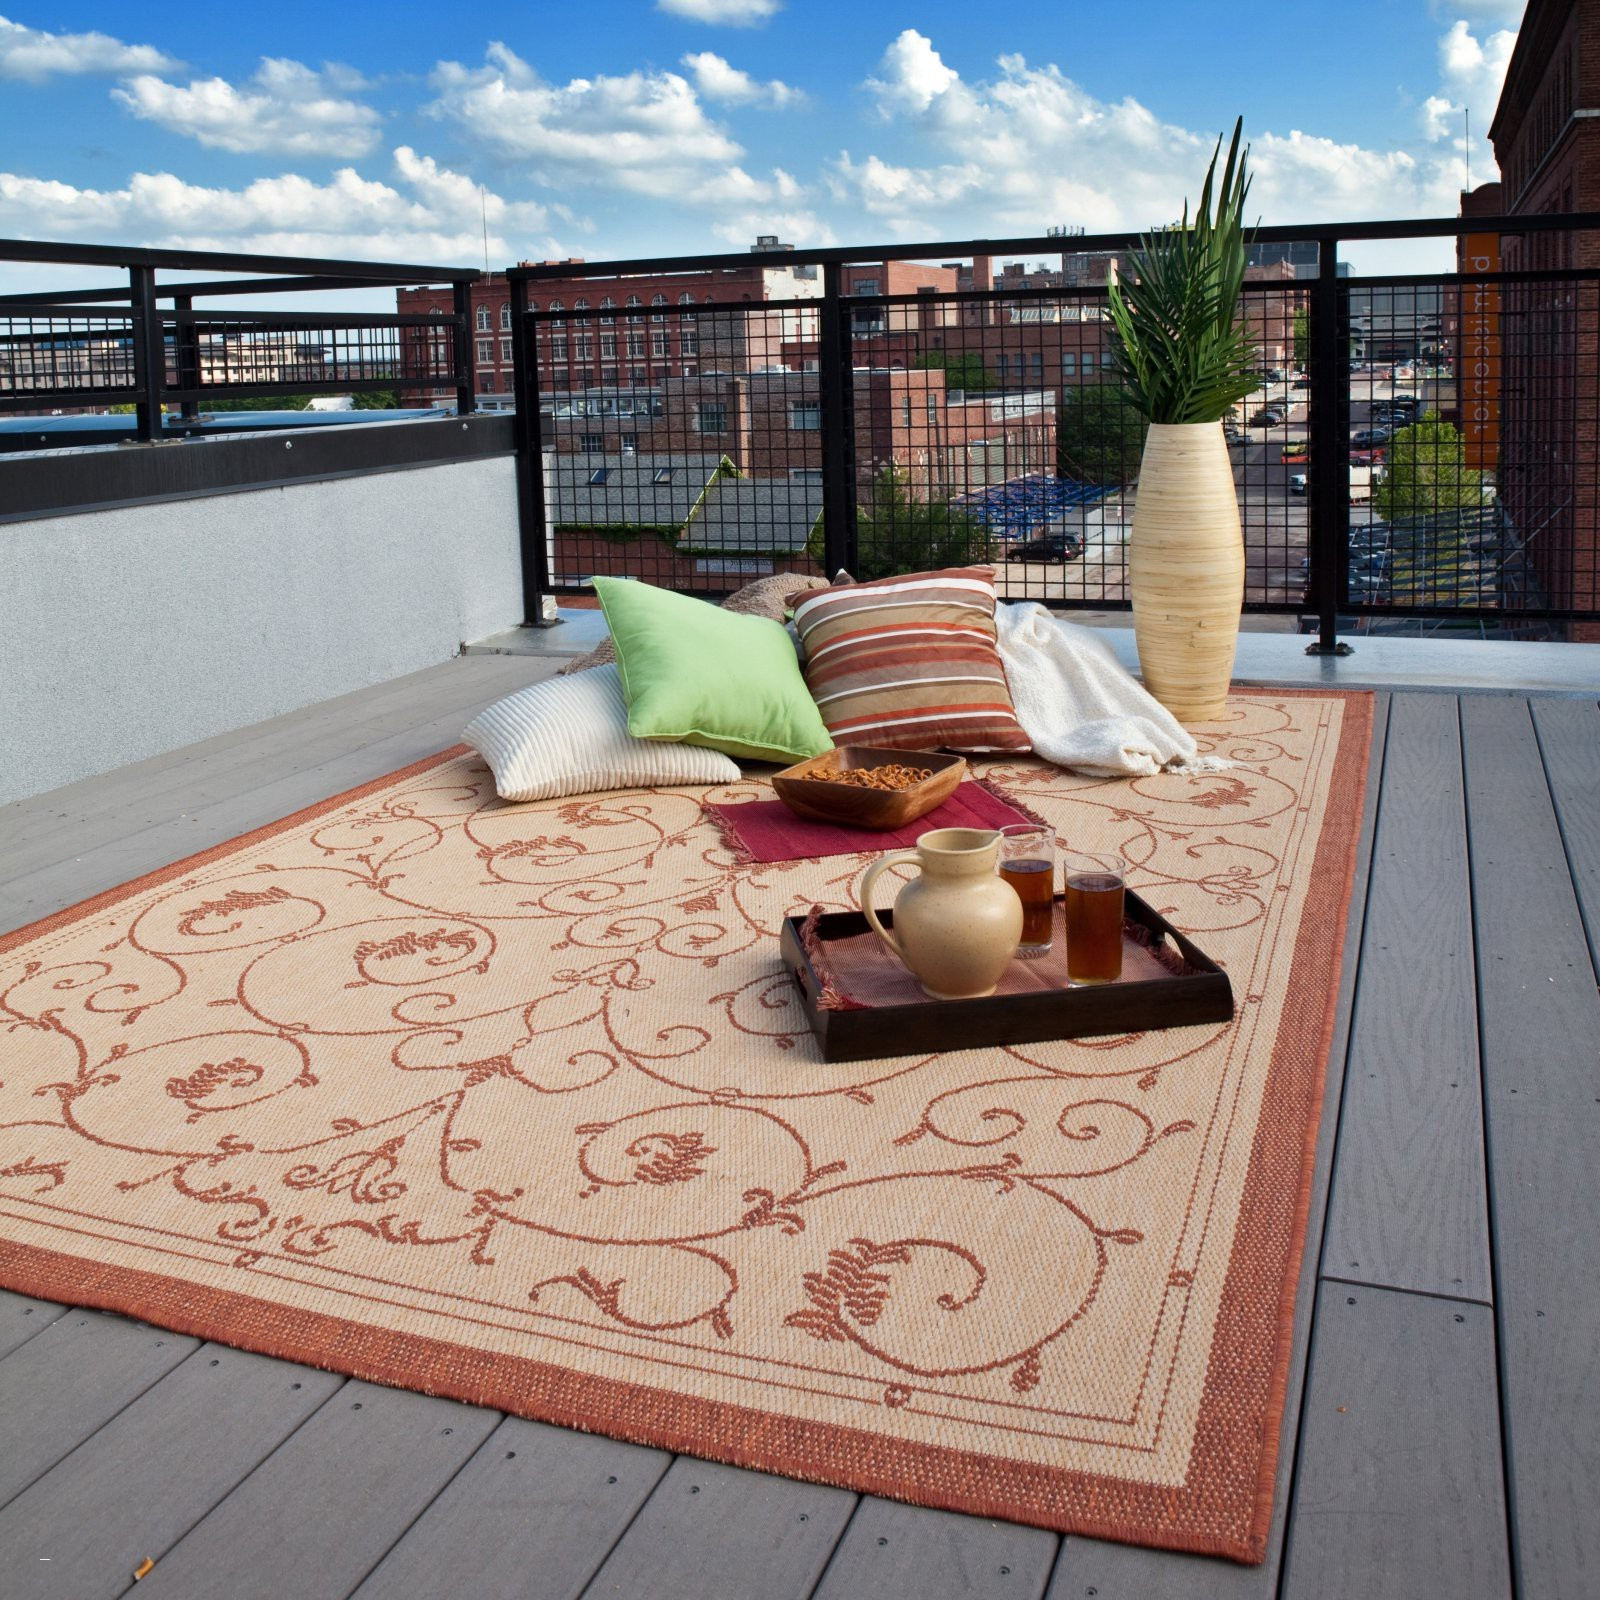 28 Great Hardwood Floor Protectors Furniture Lowes 2024 free download hardwood floor protectors furniture lowes of 19 fresh lowes outdoor carpet image dizpos com with regard to lowes outdoor carpet best of 25 fresh patio rugs lowes patio furniture pictures of 